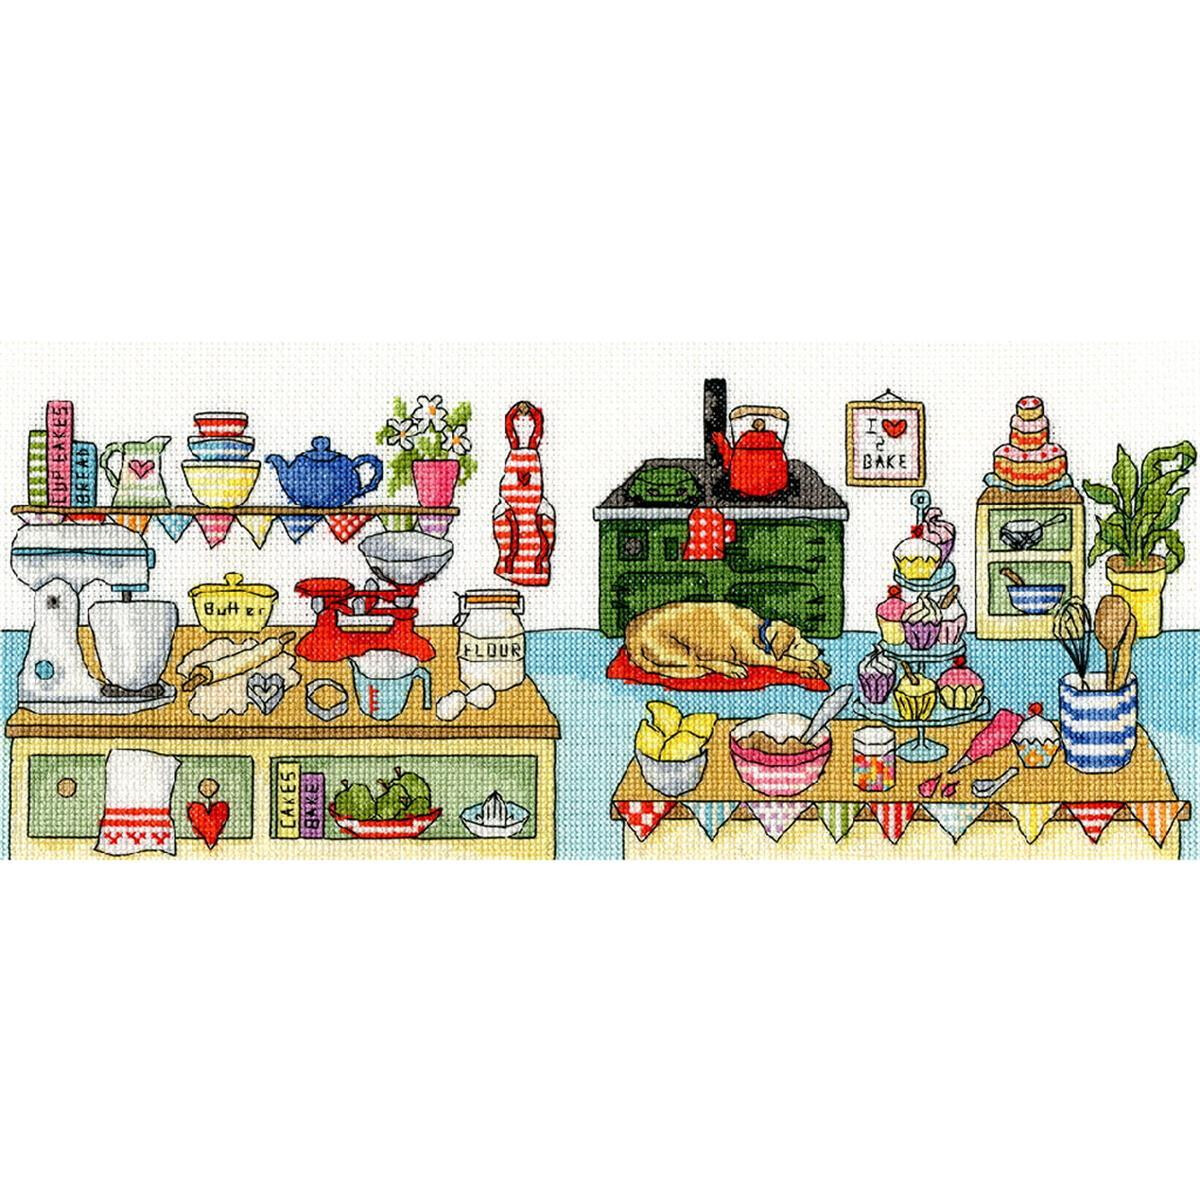 A colorful cross stitch picture of a vintage kitchen...